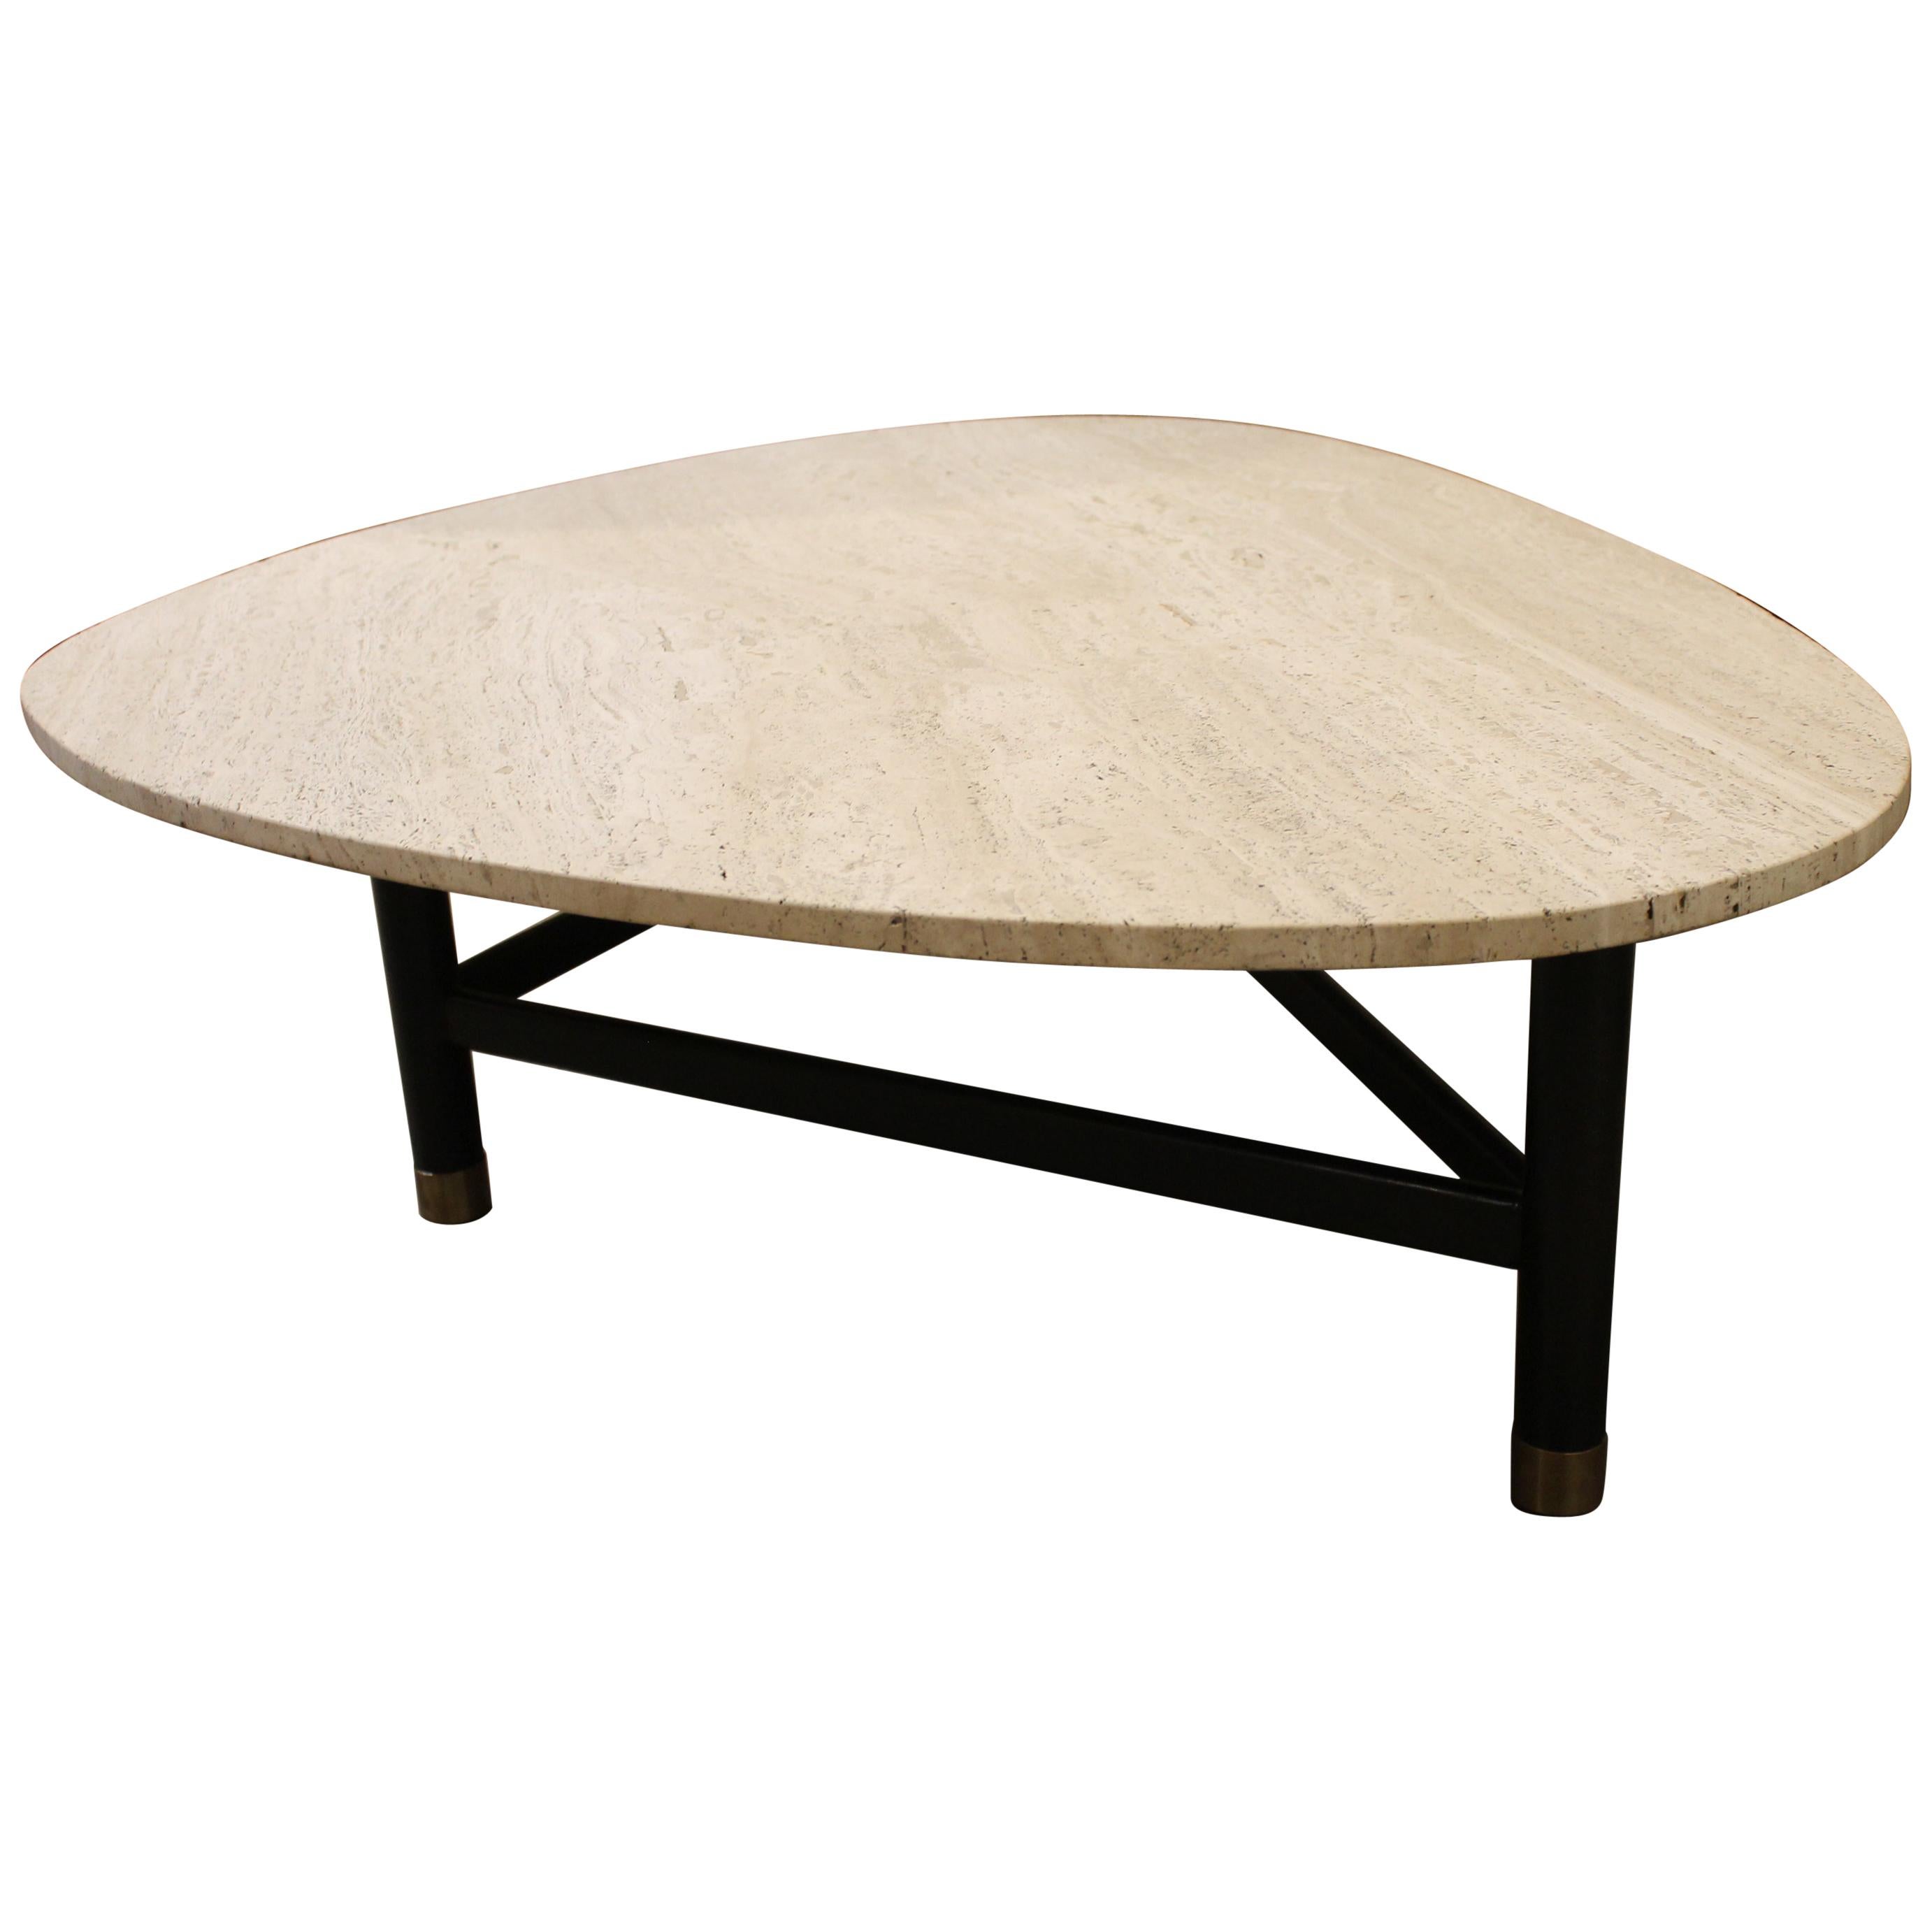 Harvey Probber Coffee Table with Travertine Top